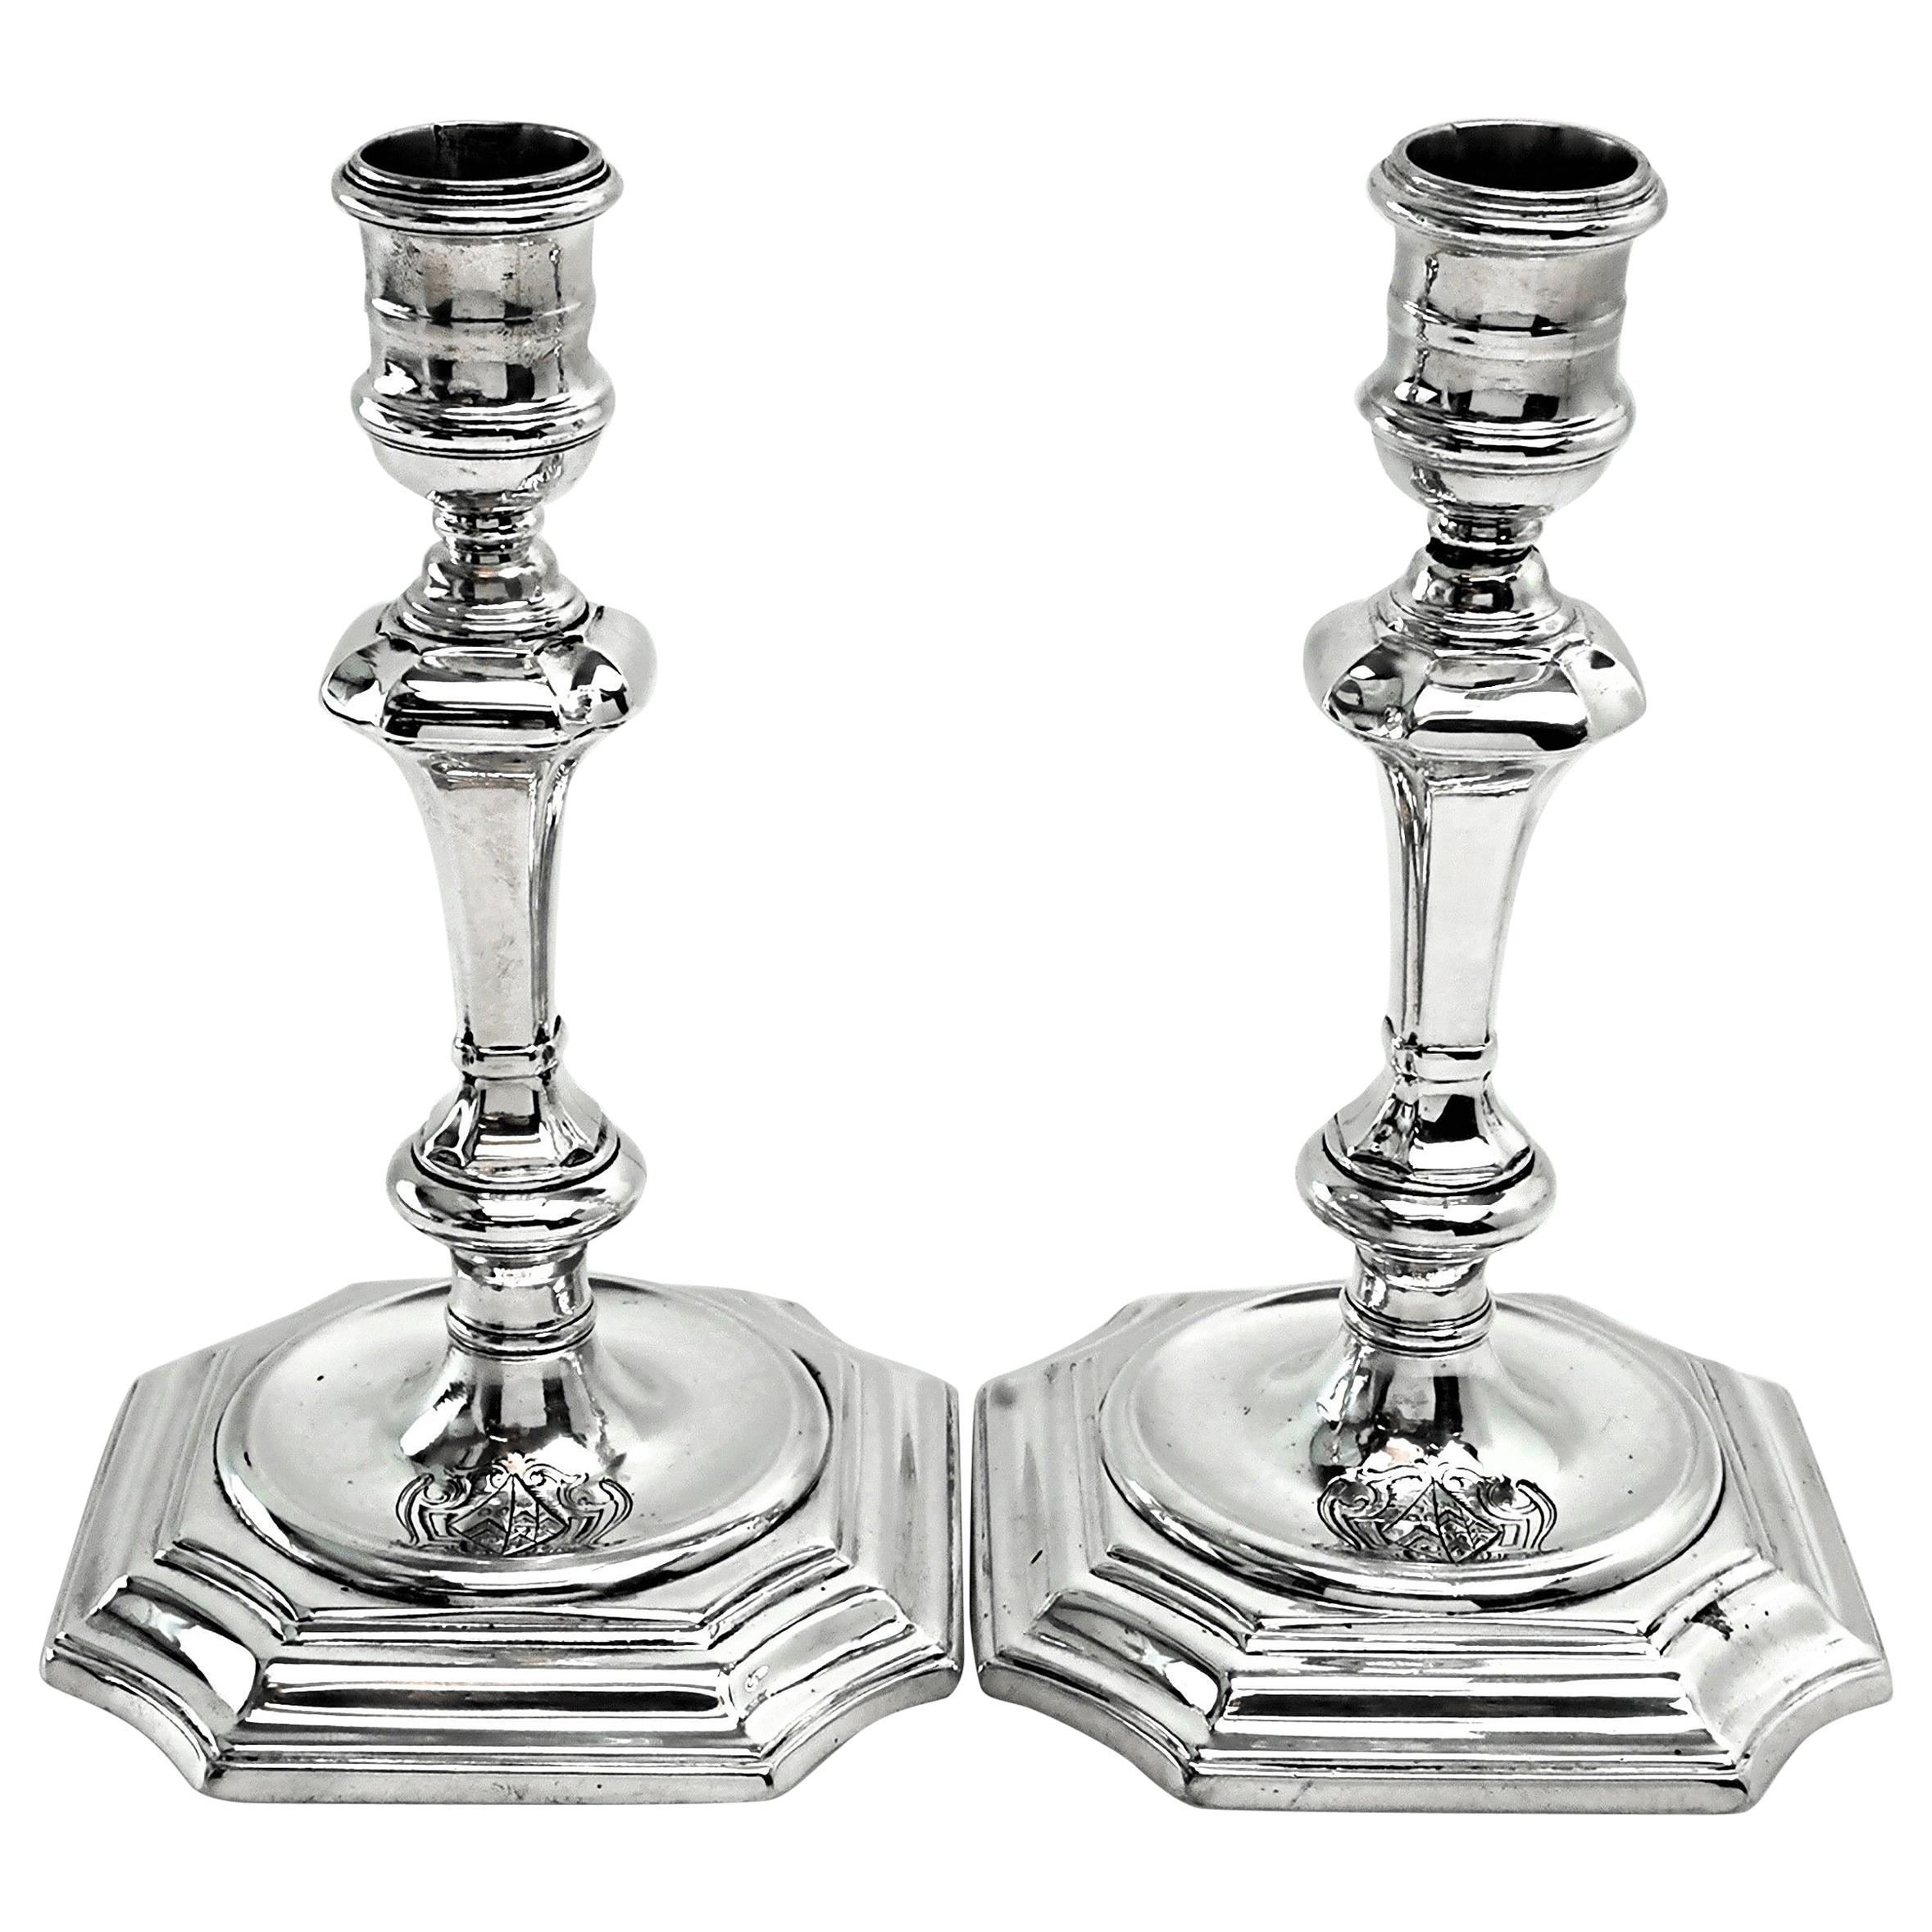 Pair of Antique George I Georgian Silver Candlesticks / Candleholders 1724